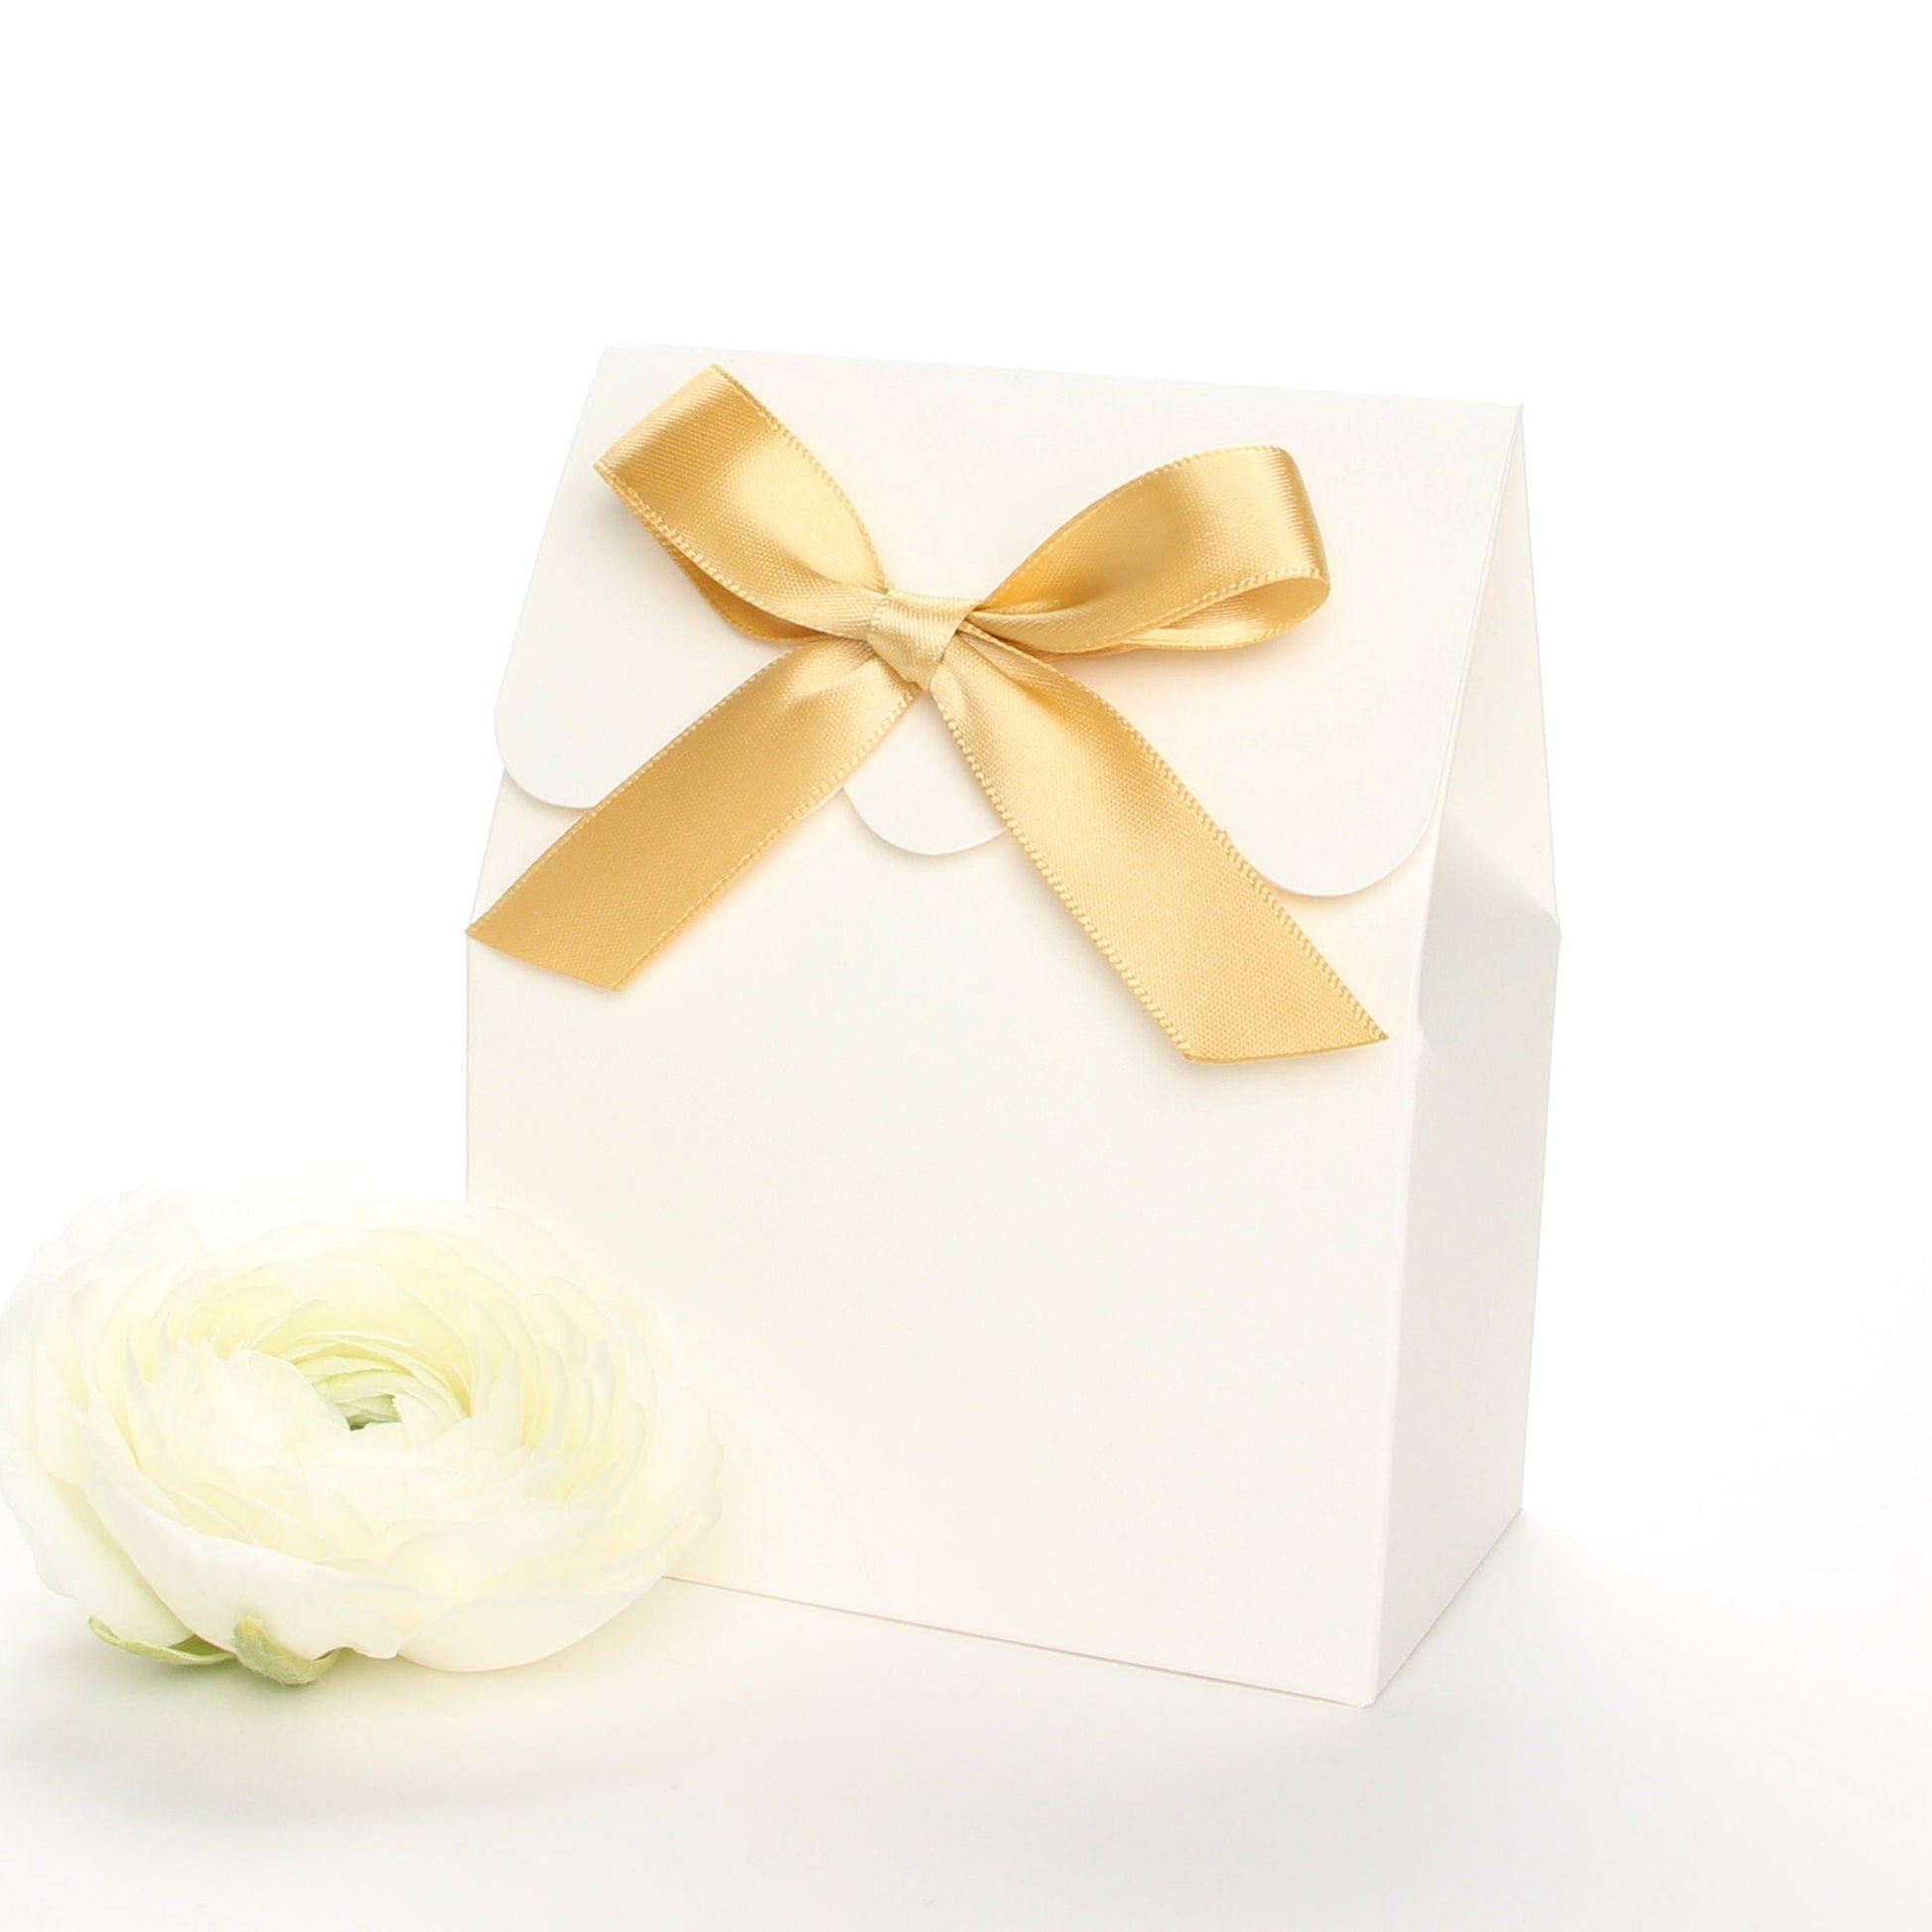 Lux Party’s ivory favor box with a scalloped edge and a gold satin bow next to white ranunculus flowers.